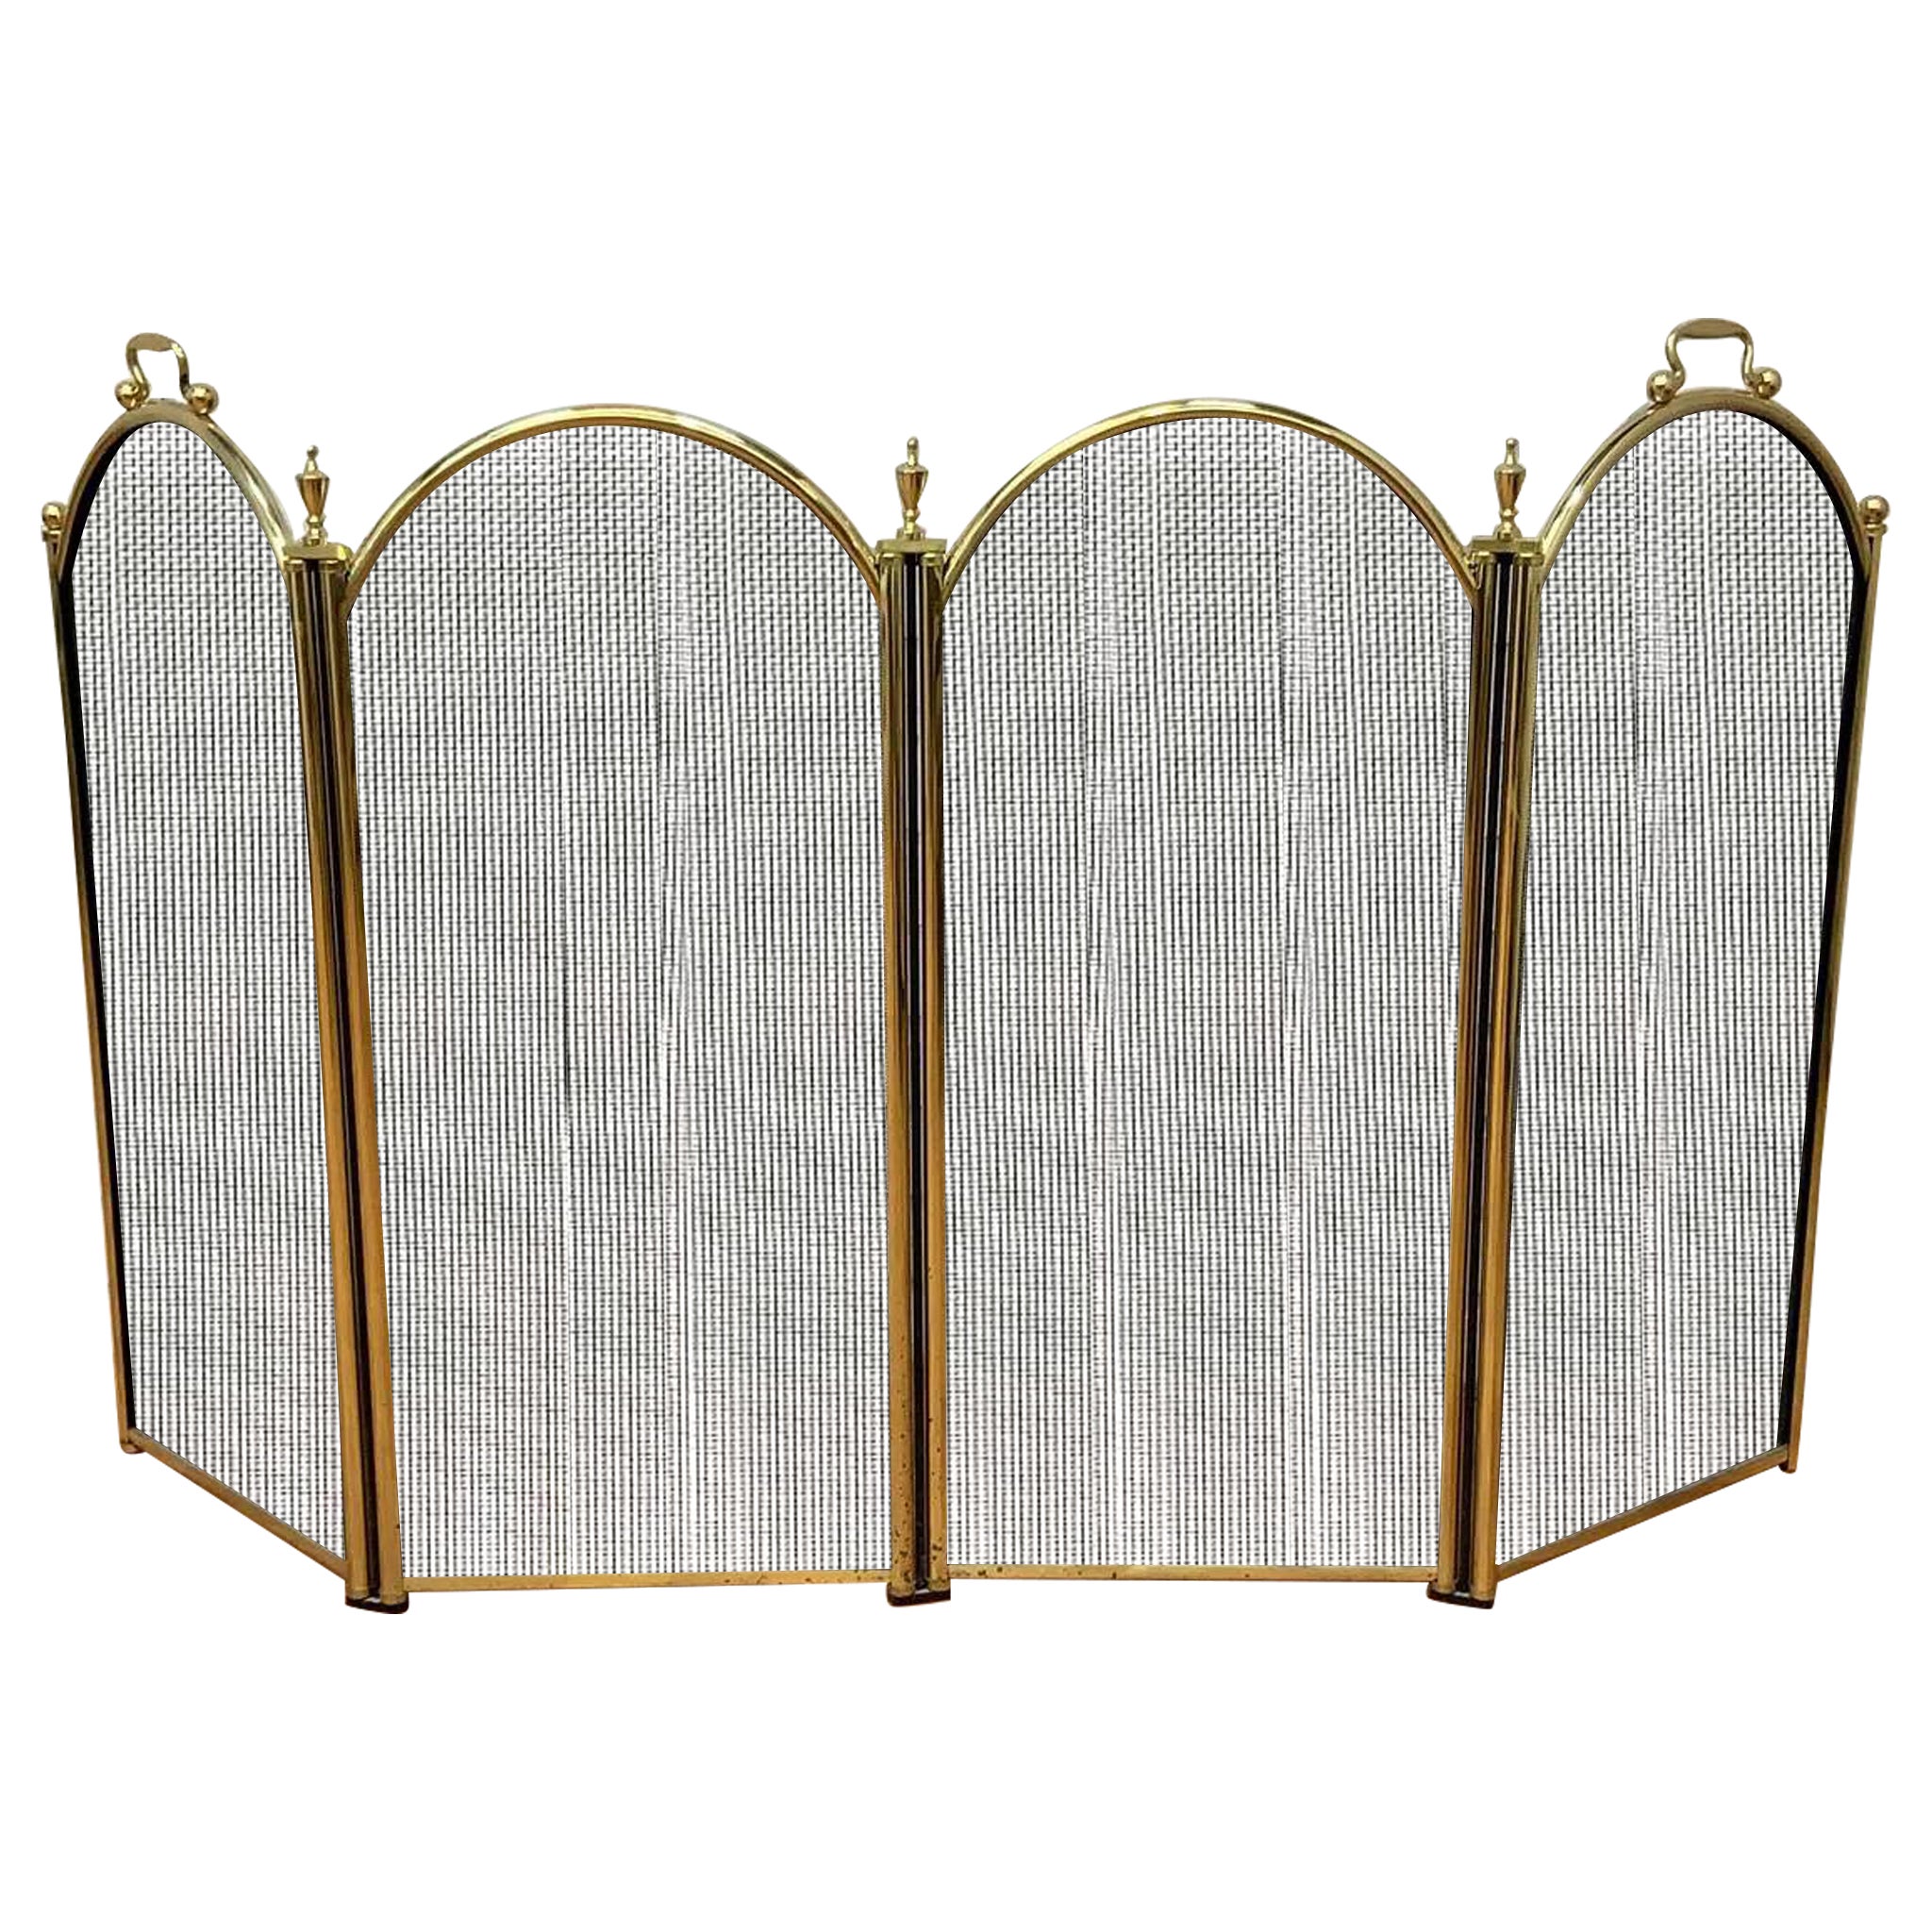 Vintage Mid Century Mesh with Brass Ball Handles & Finials Folding Hearth Screen